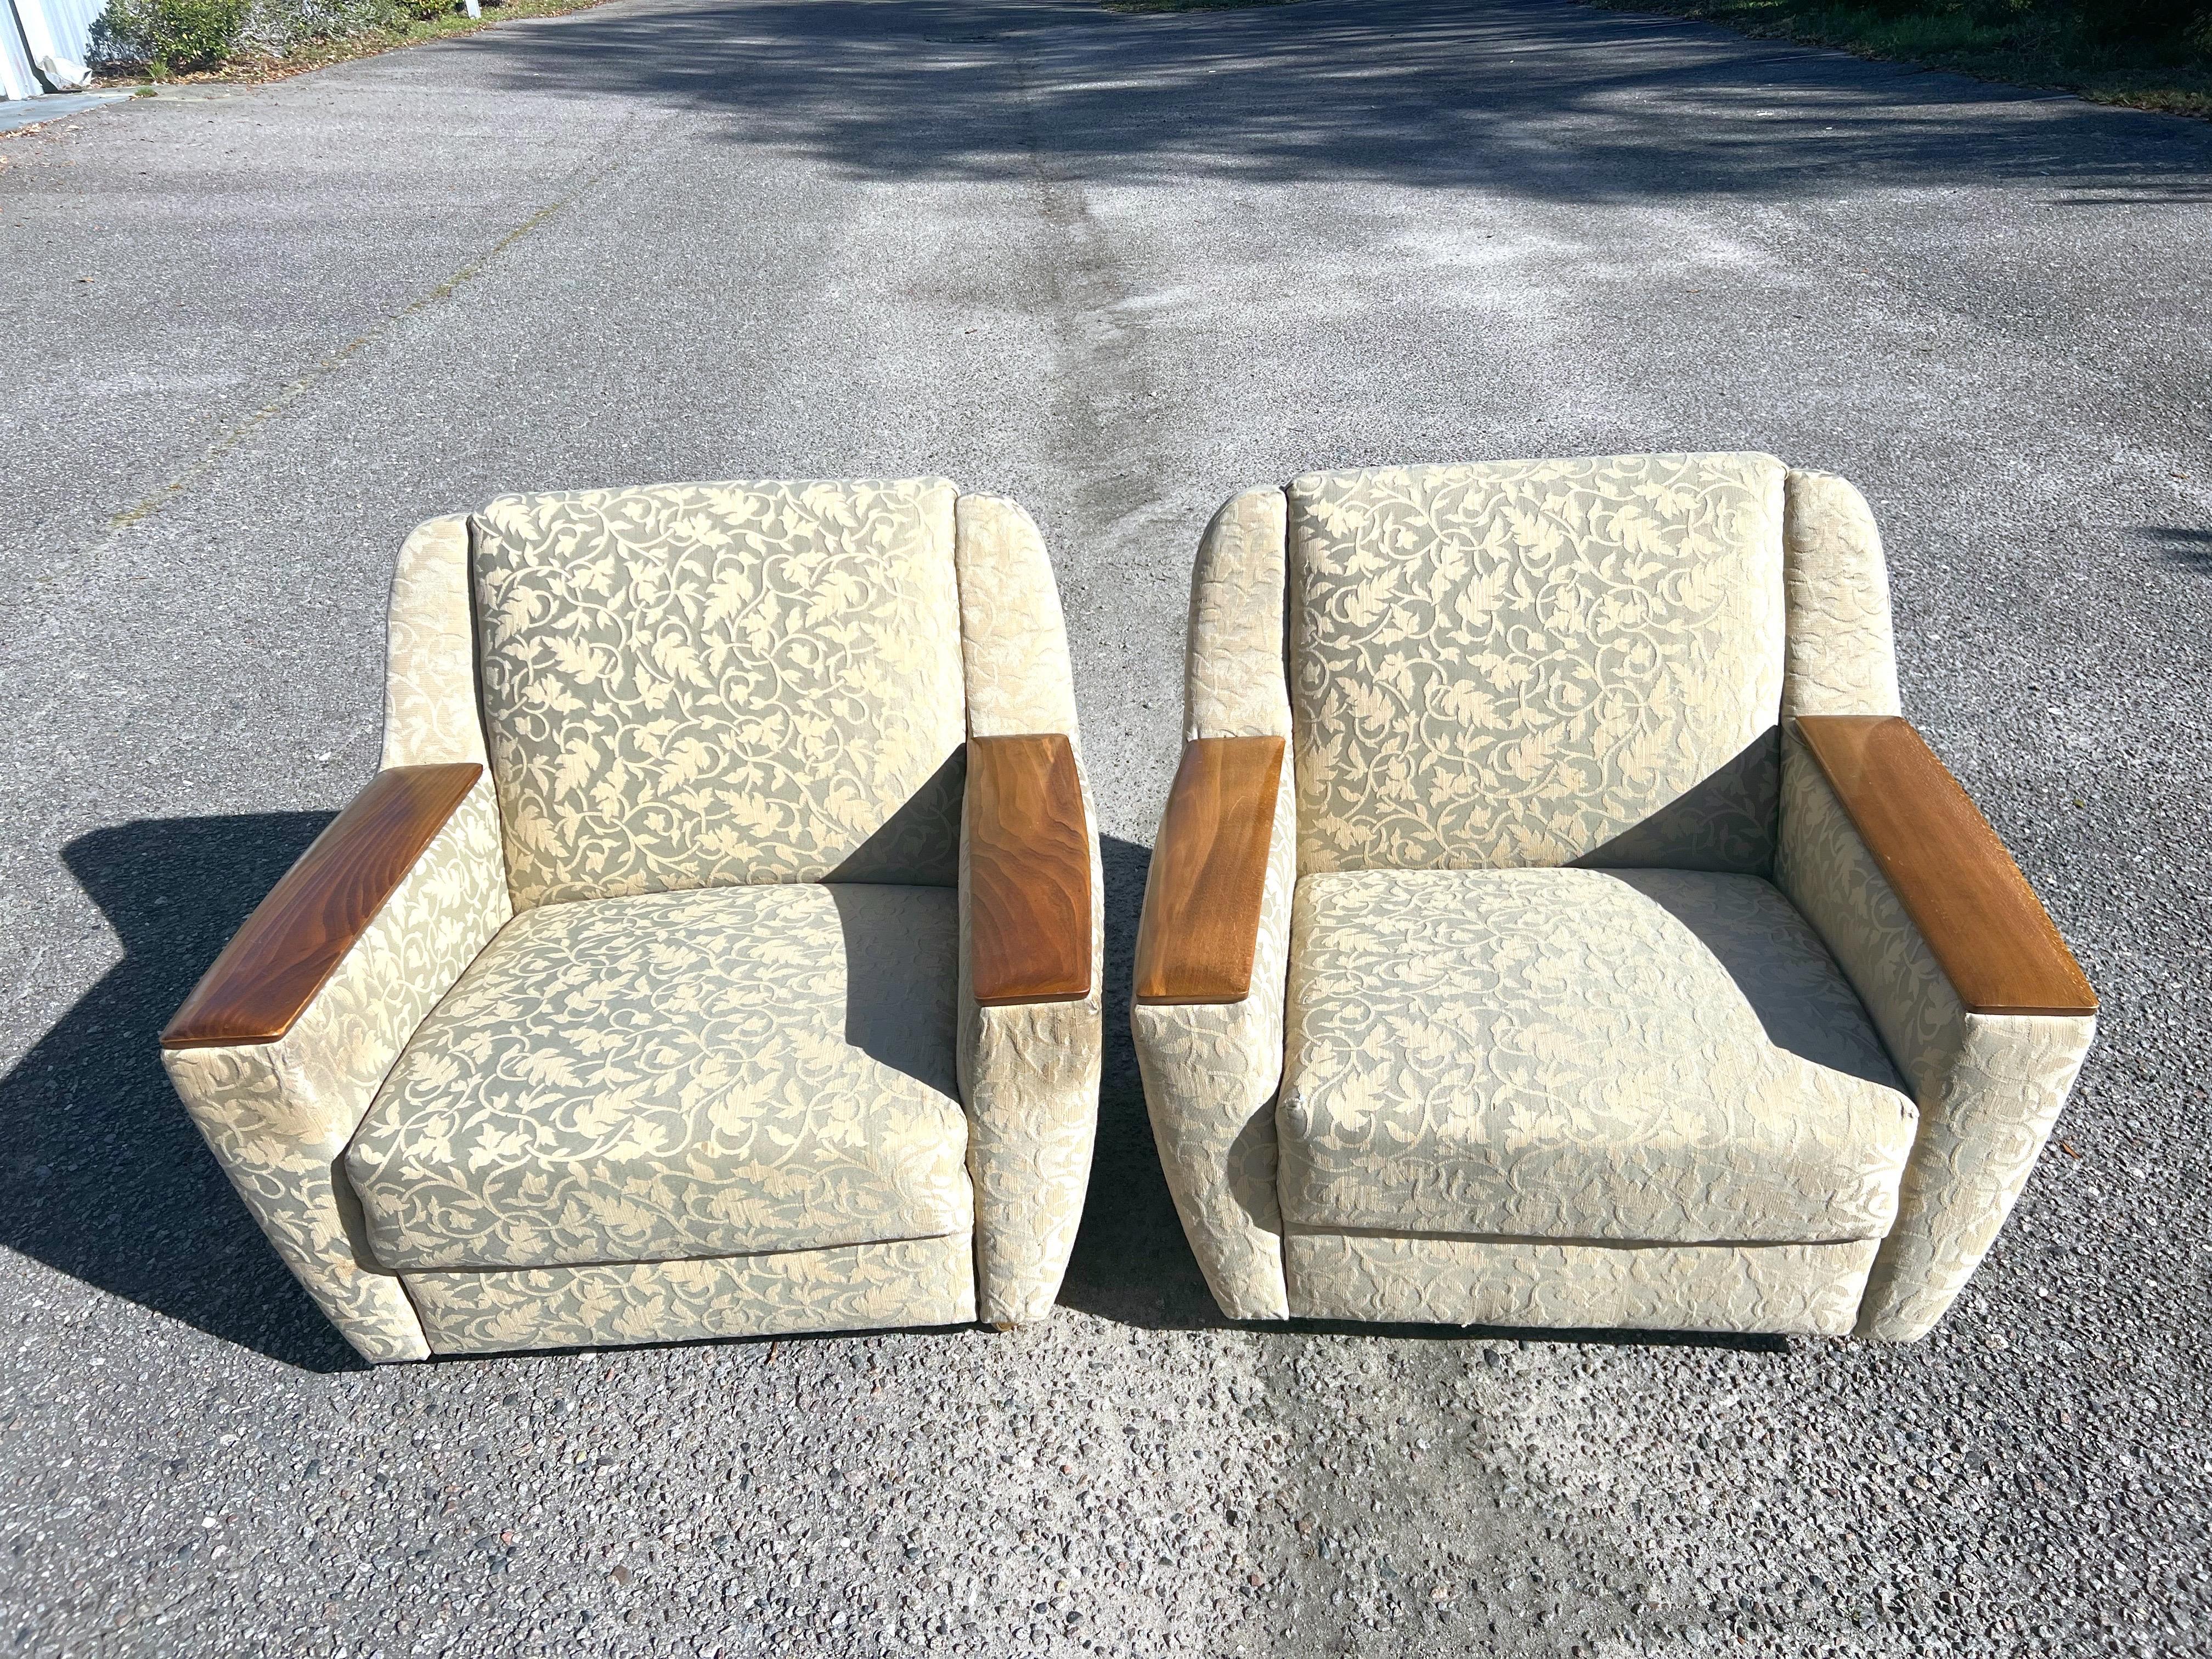 Purchased from original owners who had them reupholstered around 2012 in designer fabric.  These low slung lounge chairs are so comfortable!   They are really the kind of chairs you can curl up in.   And they have the look!   Upholstery is still in